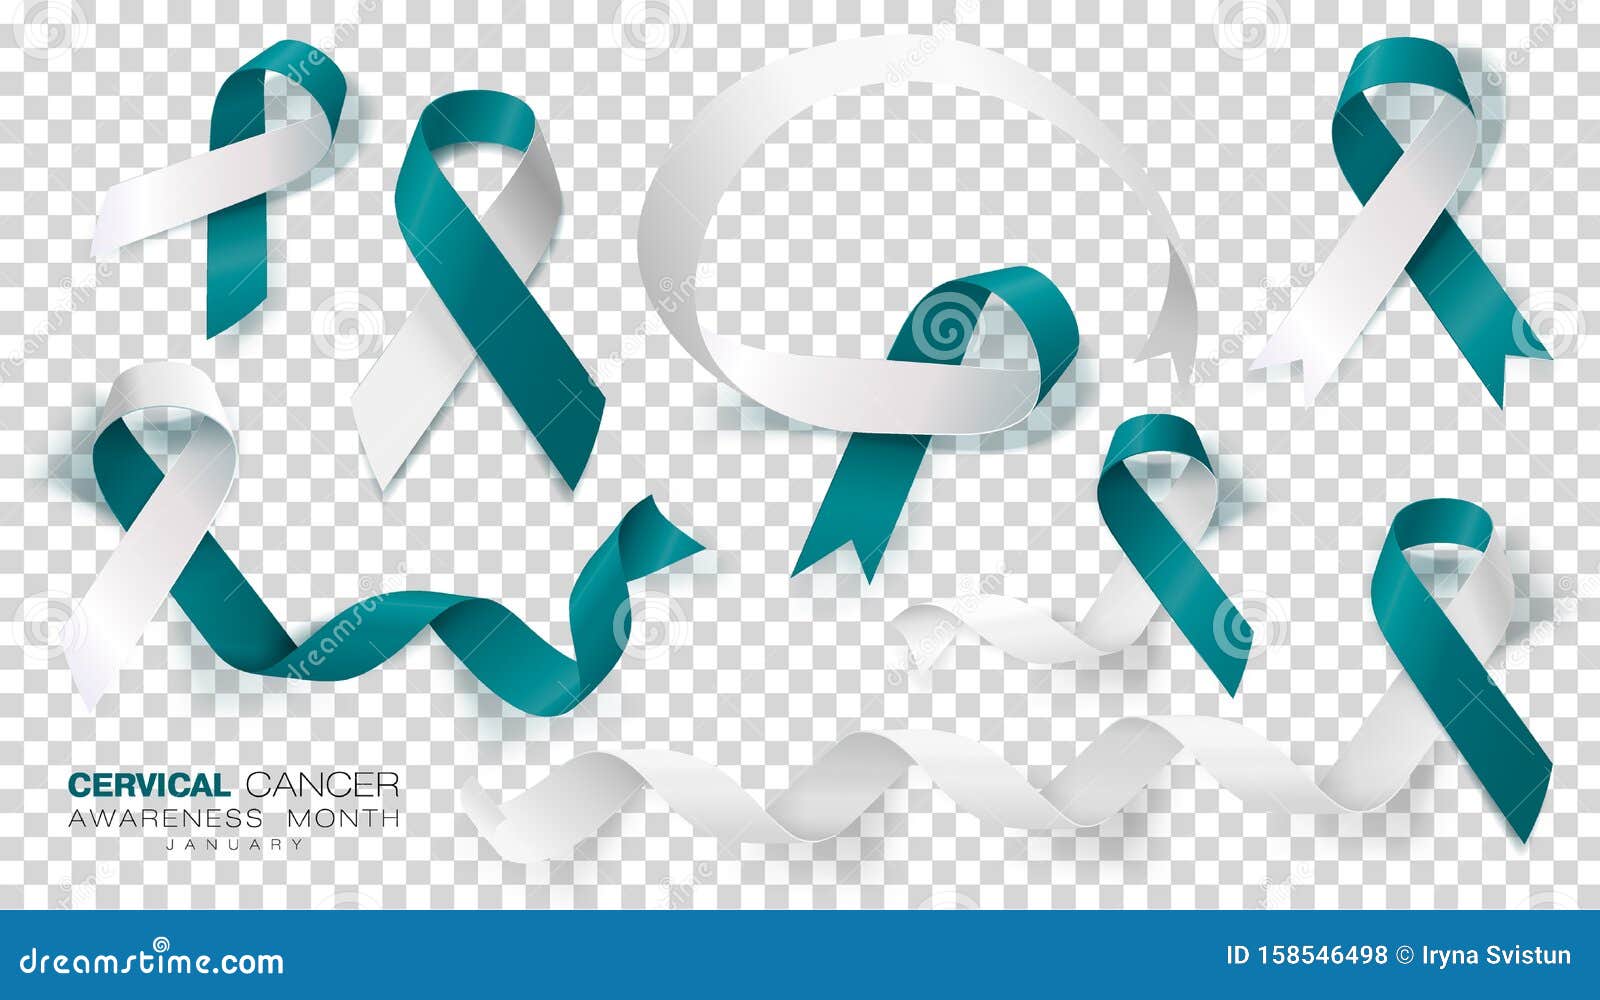 cervical cancer awareness month. teal and white ribbon  on transparent background.   template for